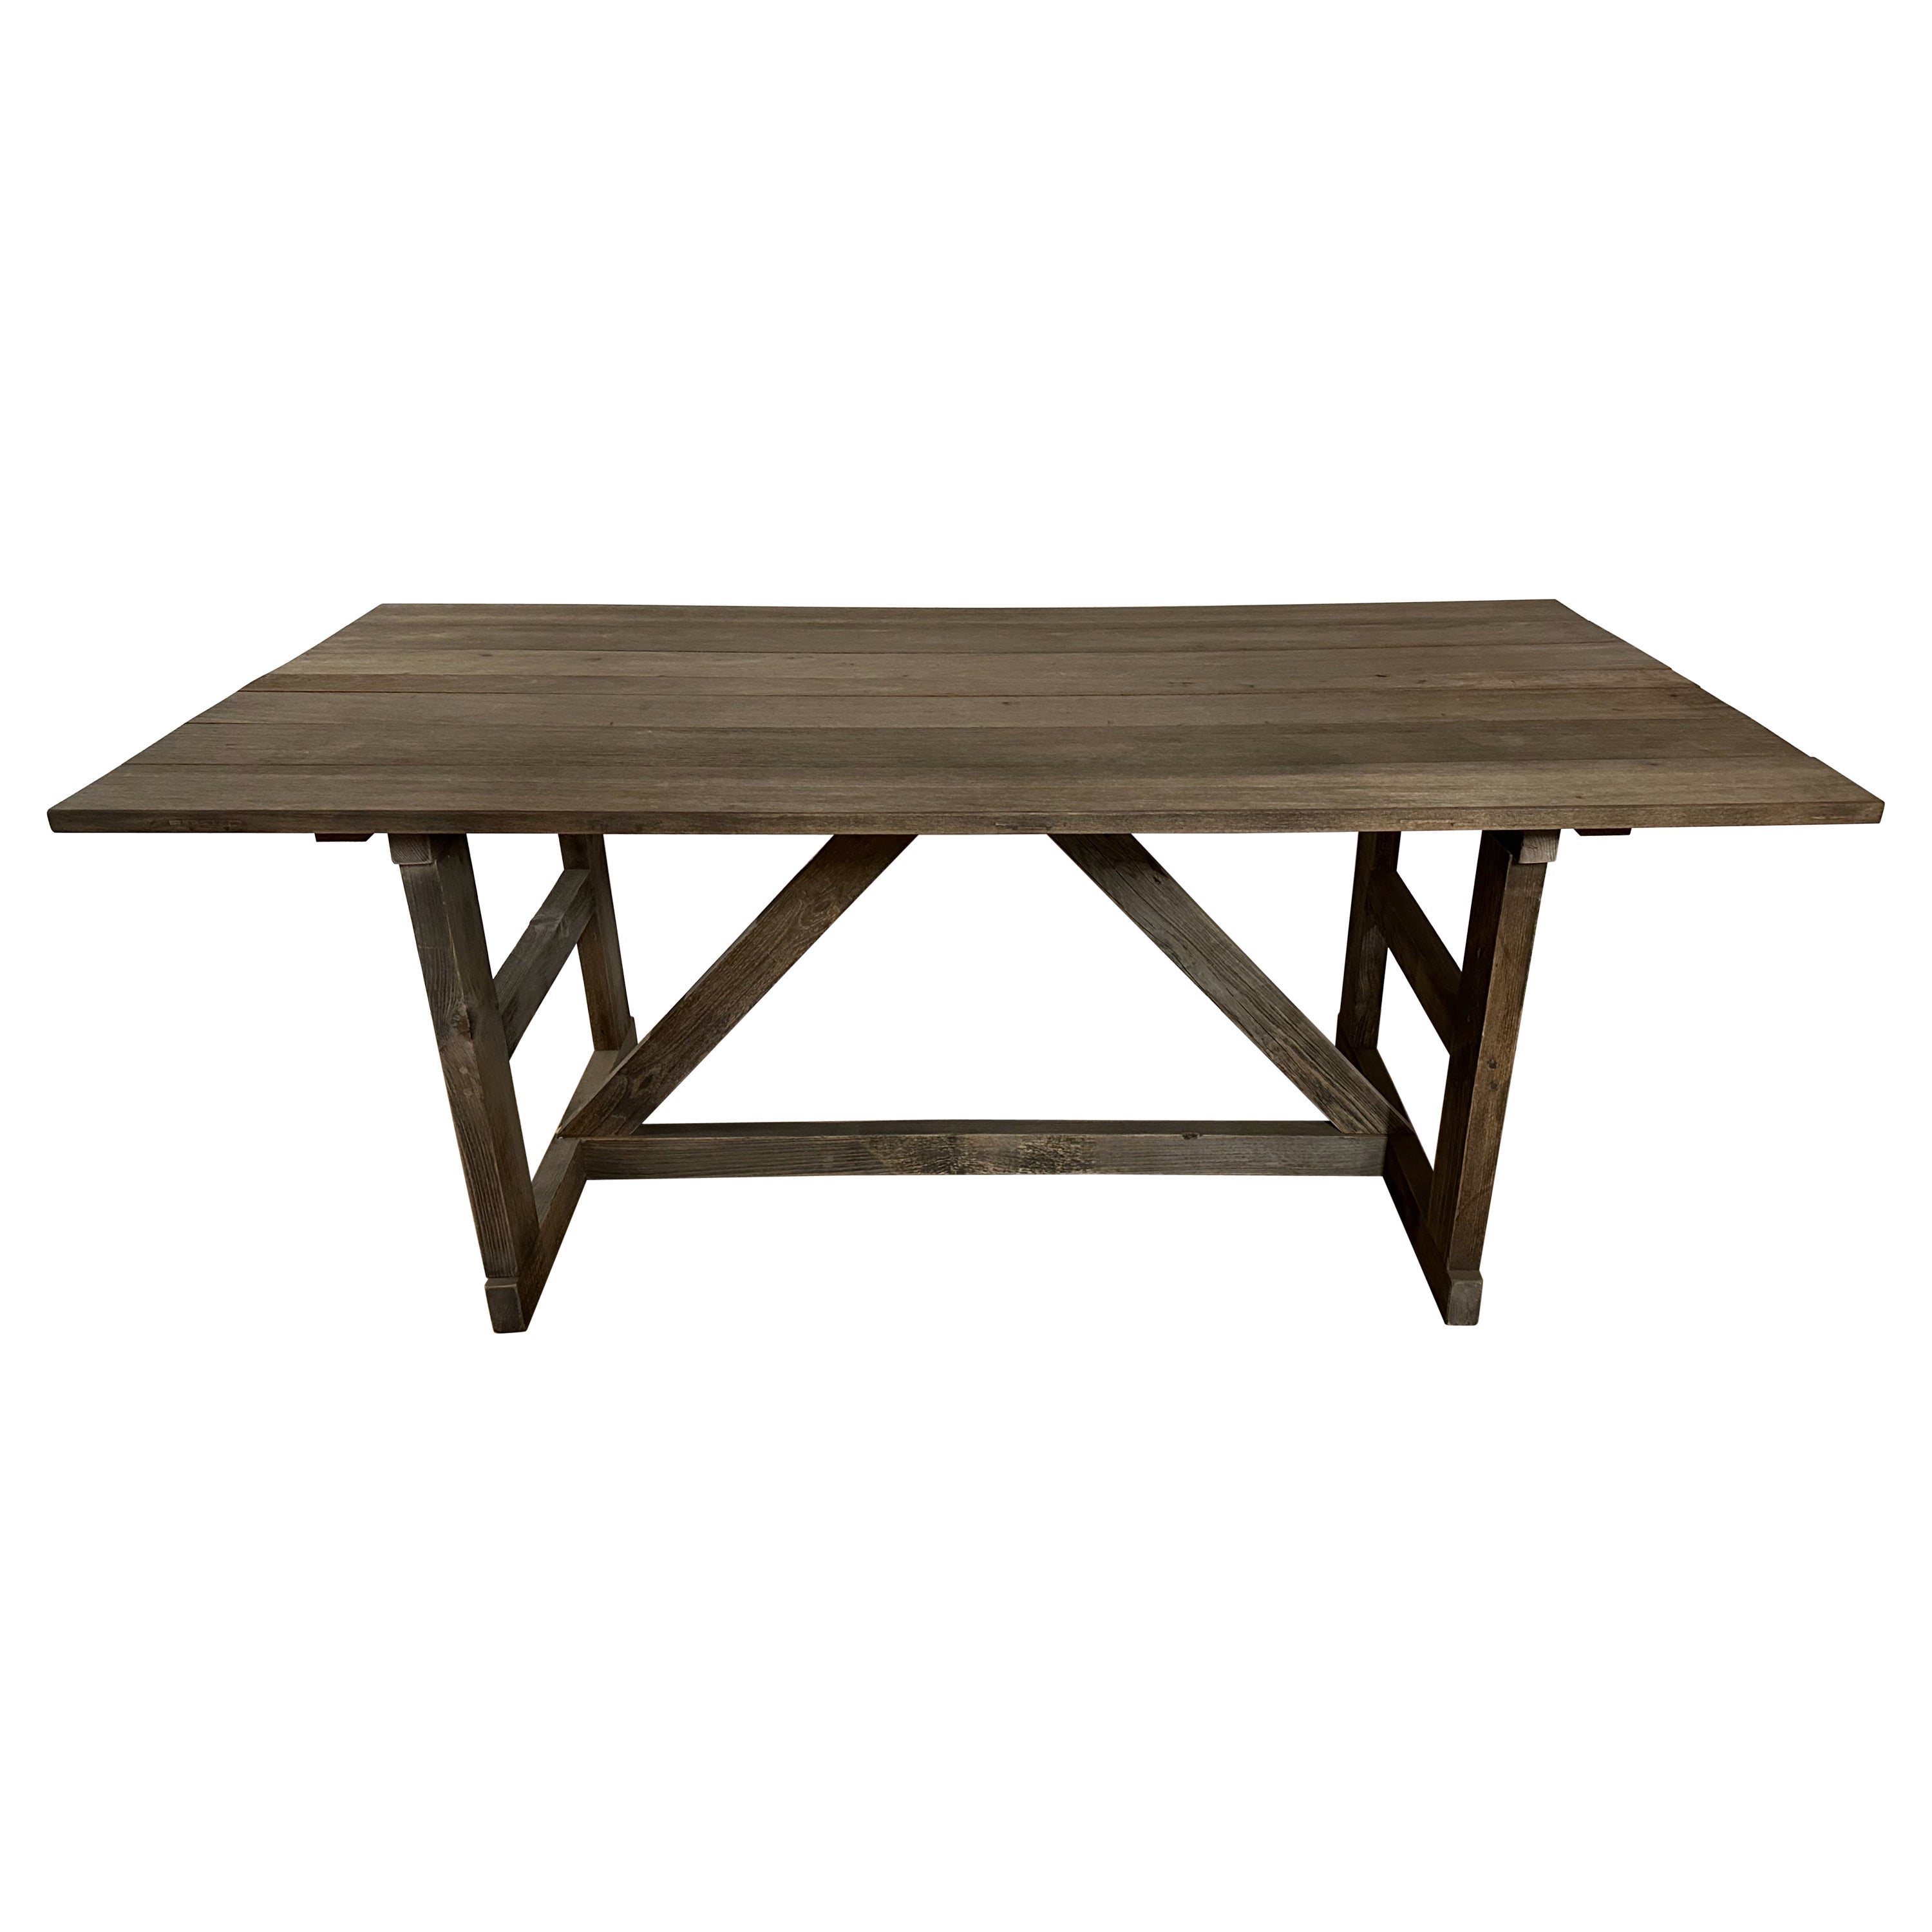 Rustic Vintage Farm or Work Table For Sale